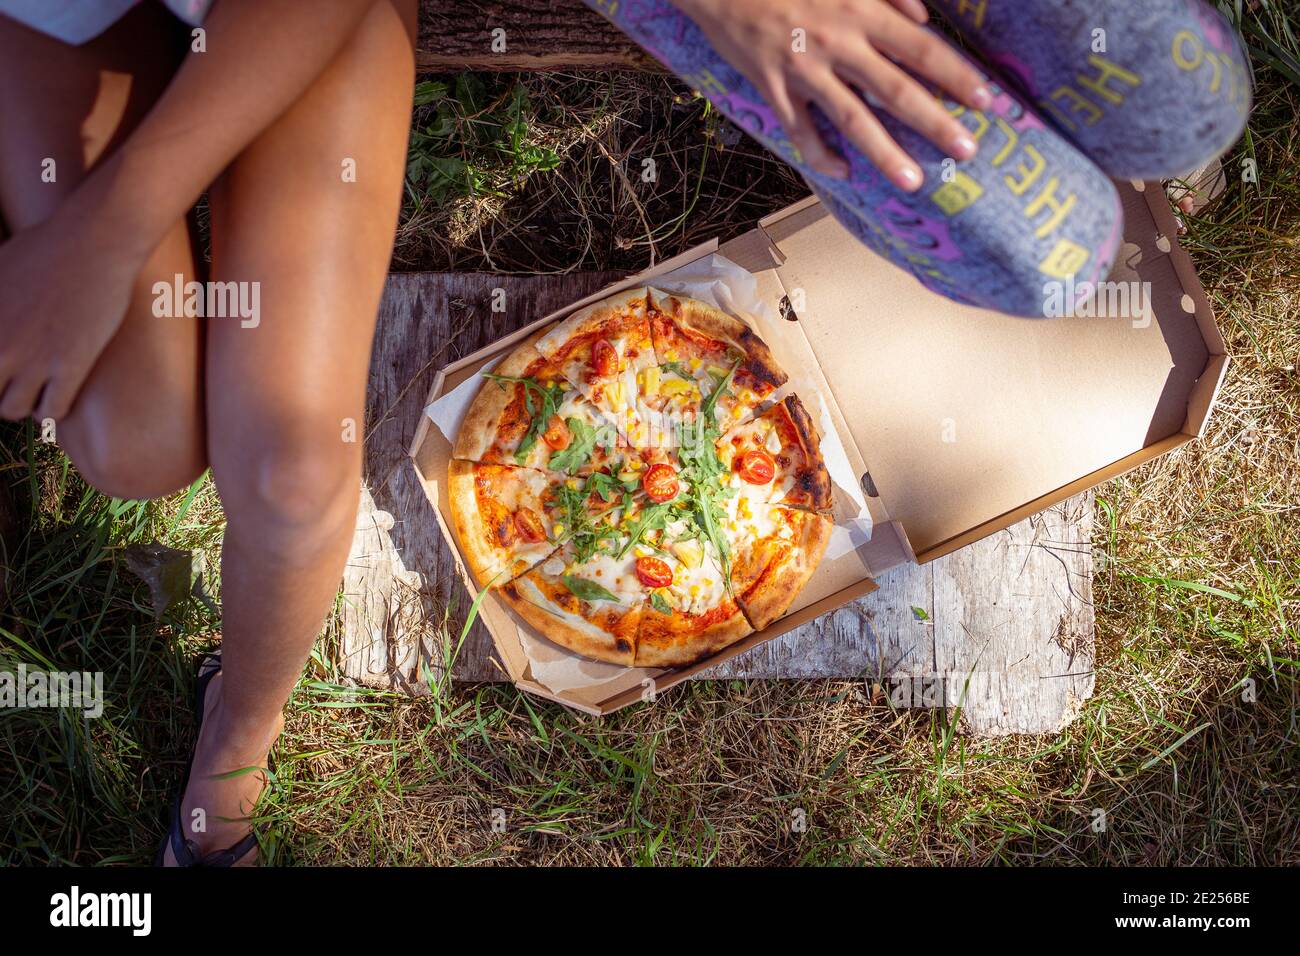 Two teenage girls sitting outdoor with pizza Stock Photo